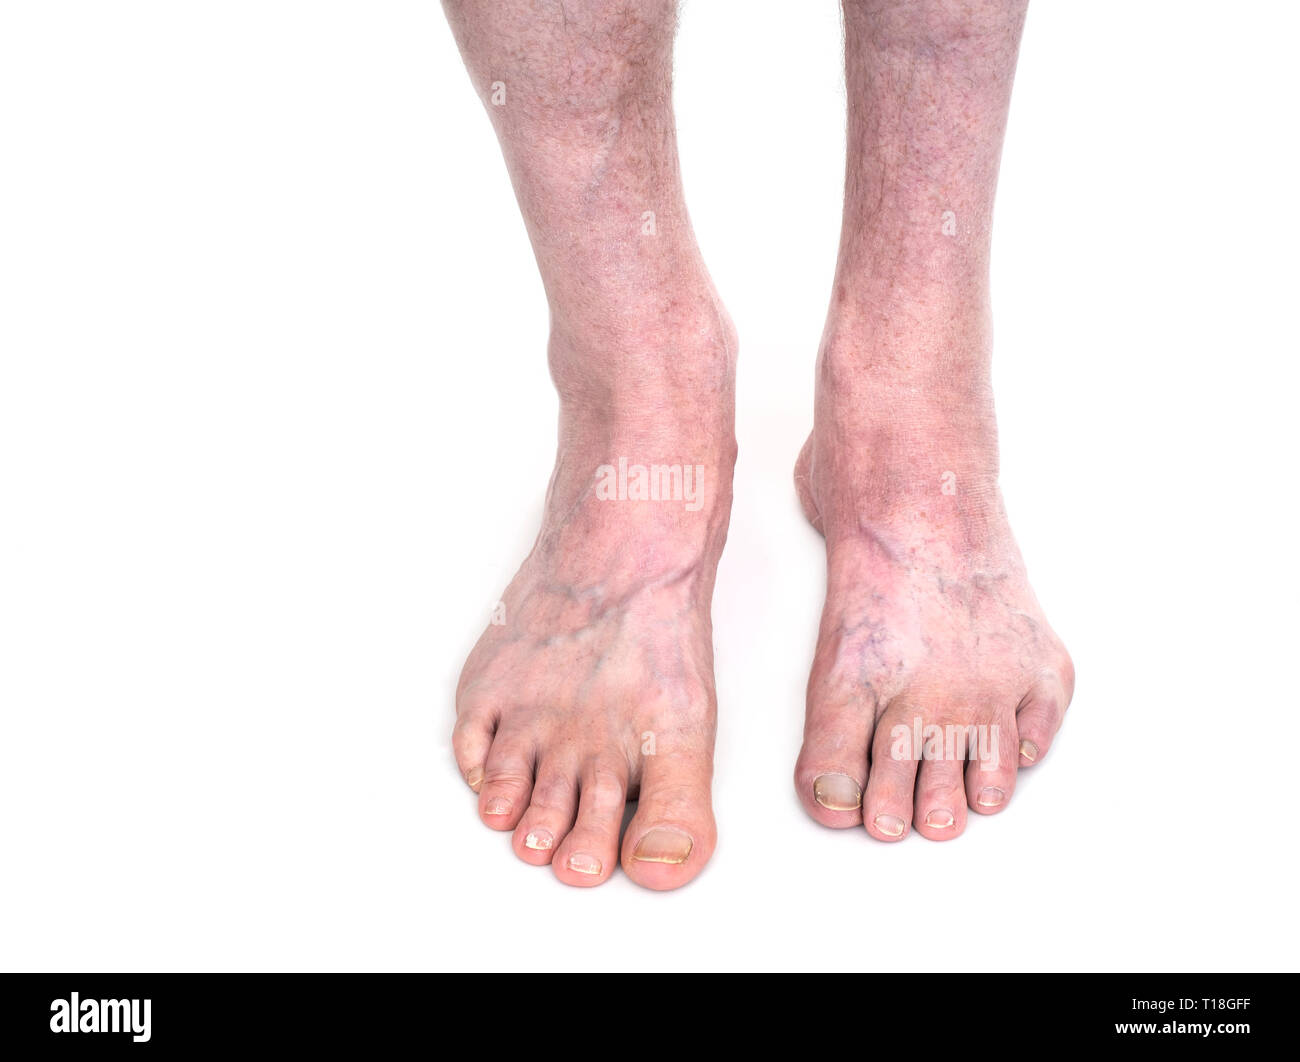 Adult Male With Club Foot Aka Talipes Despite Childhood Intervention Both Feet For Comparison On White Stock Photo Alamy